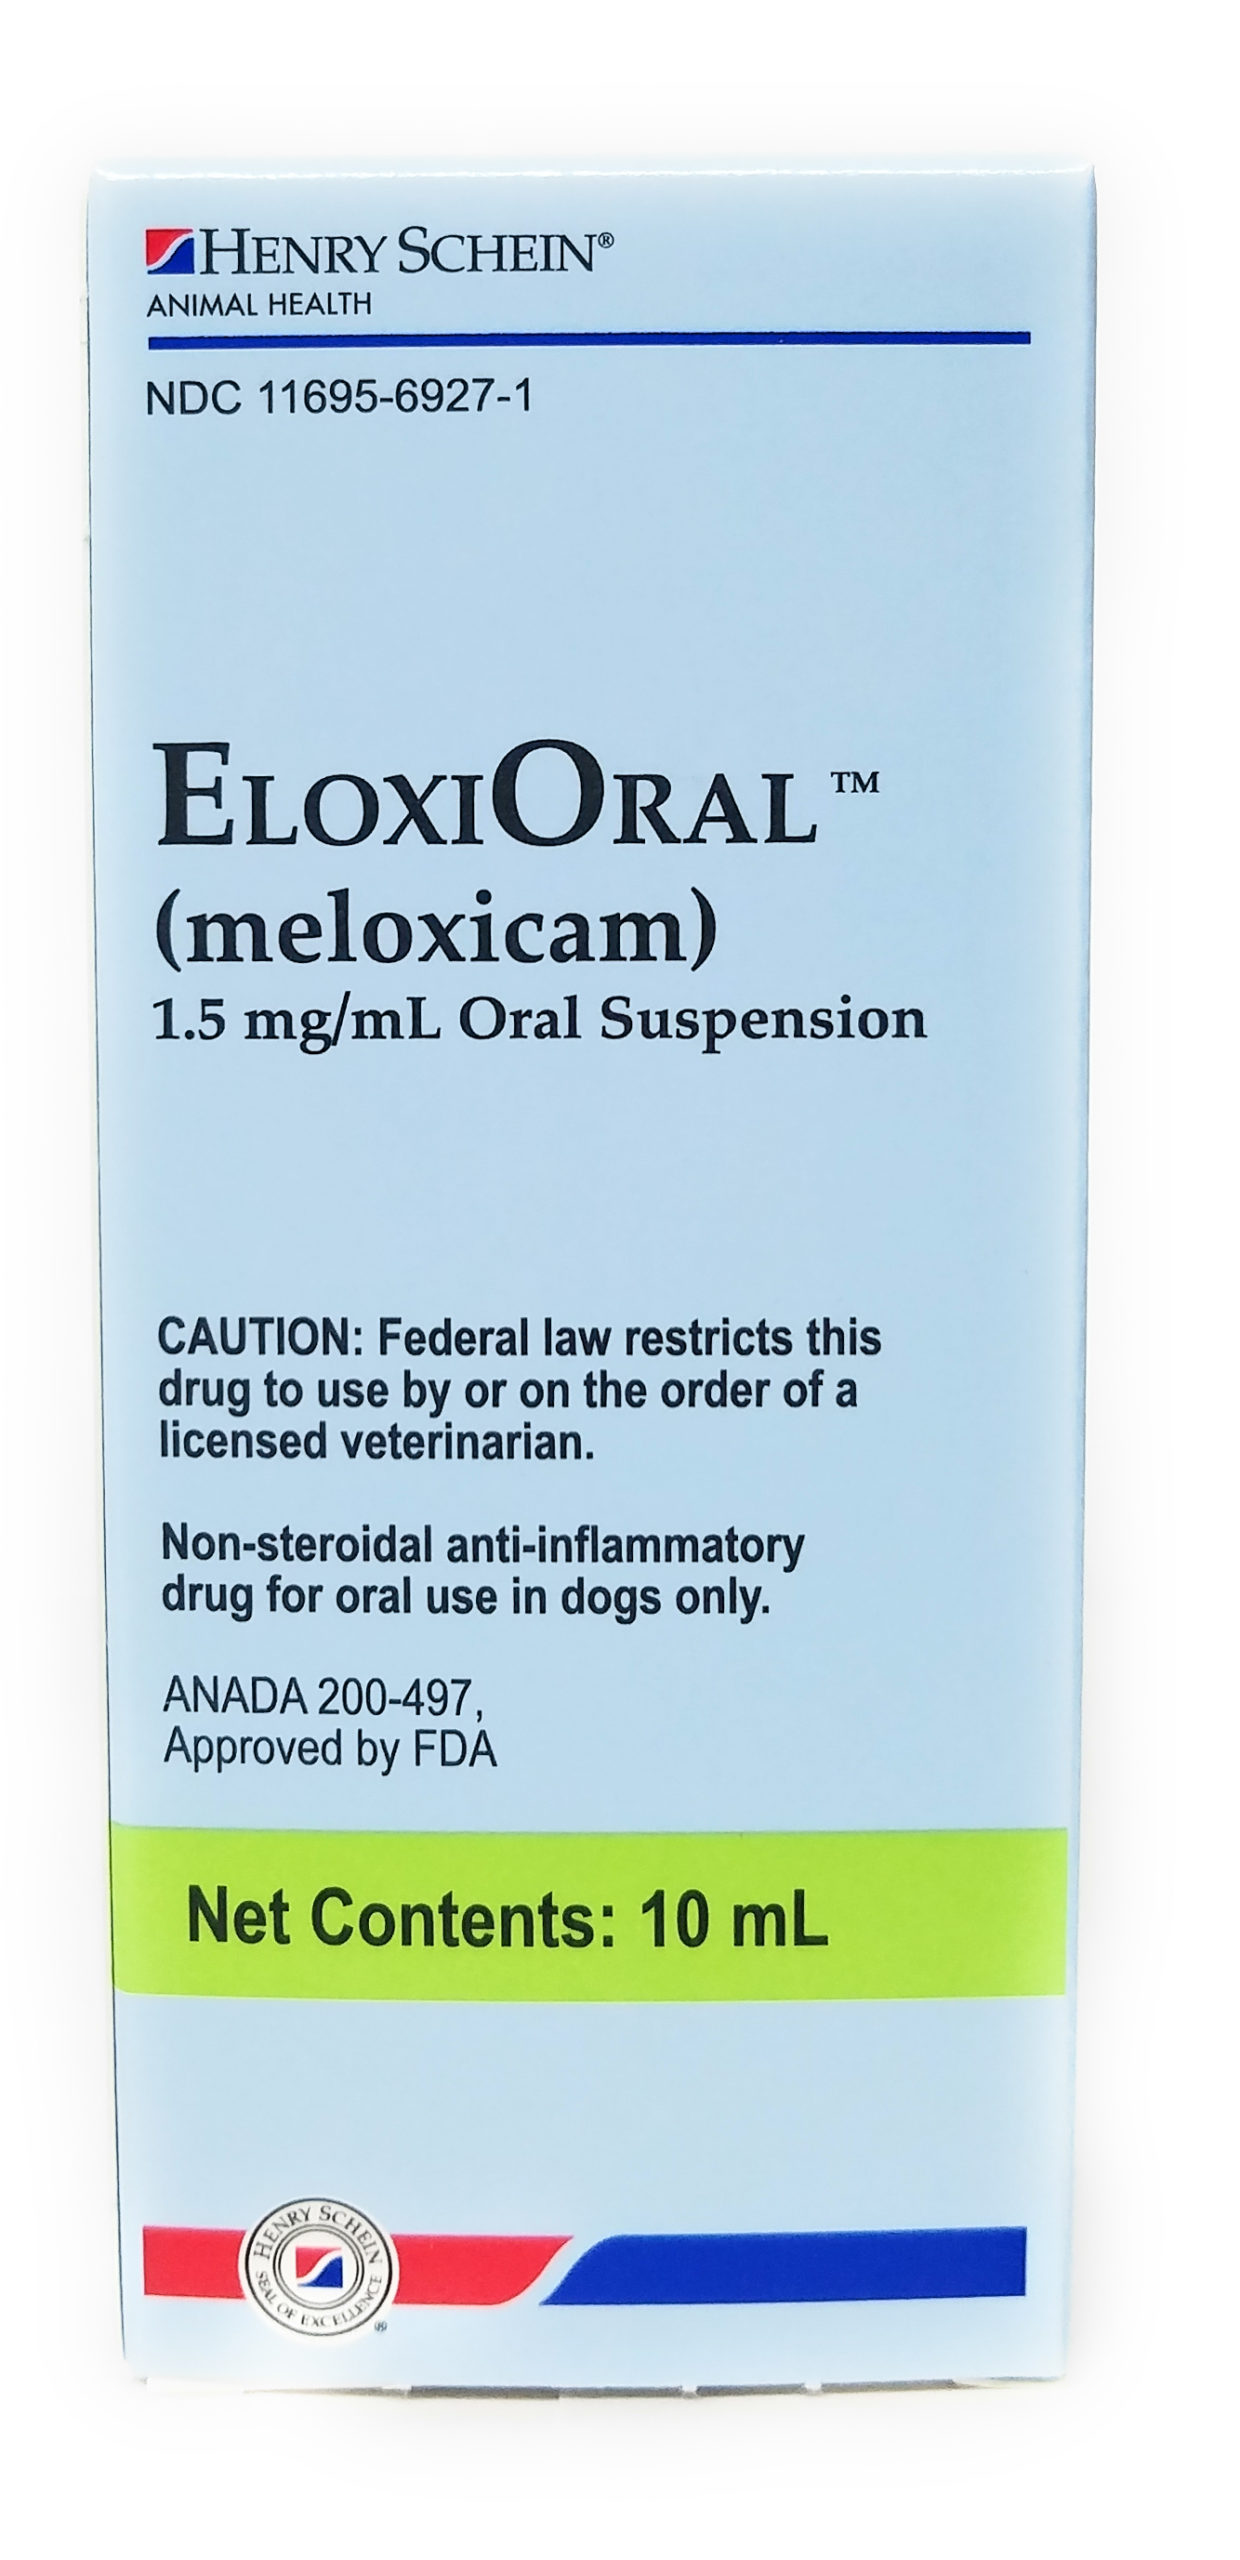 is meloxicam expensive